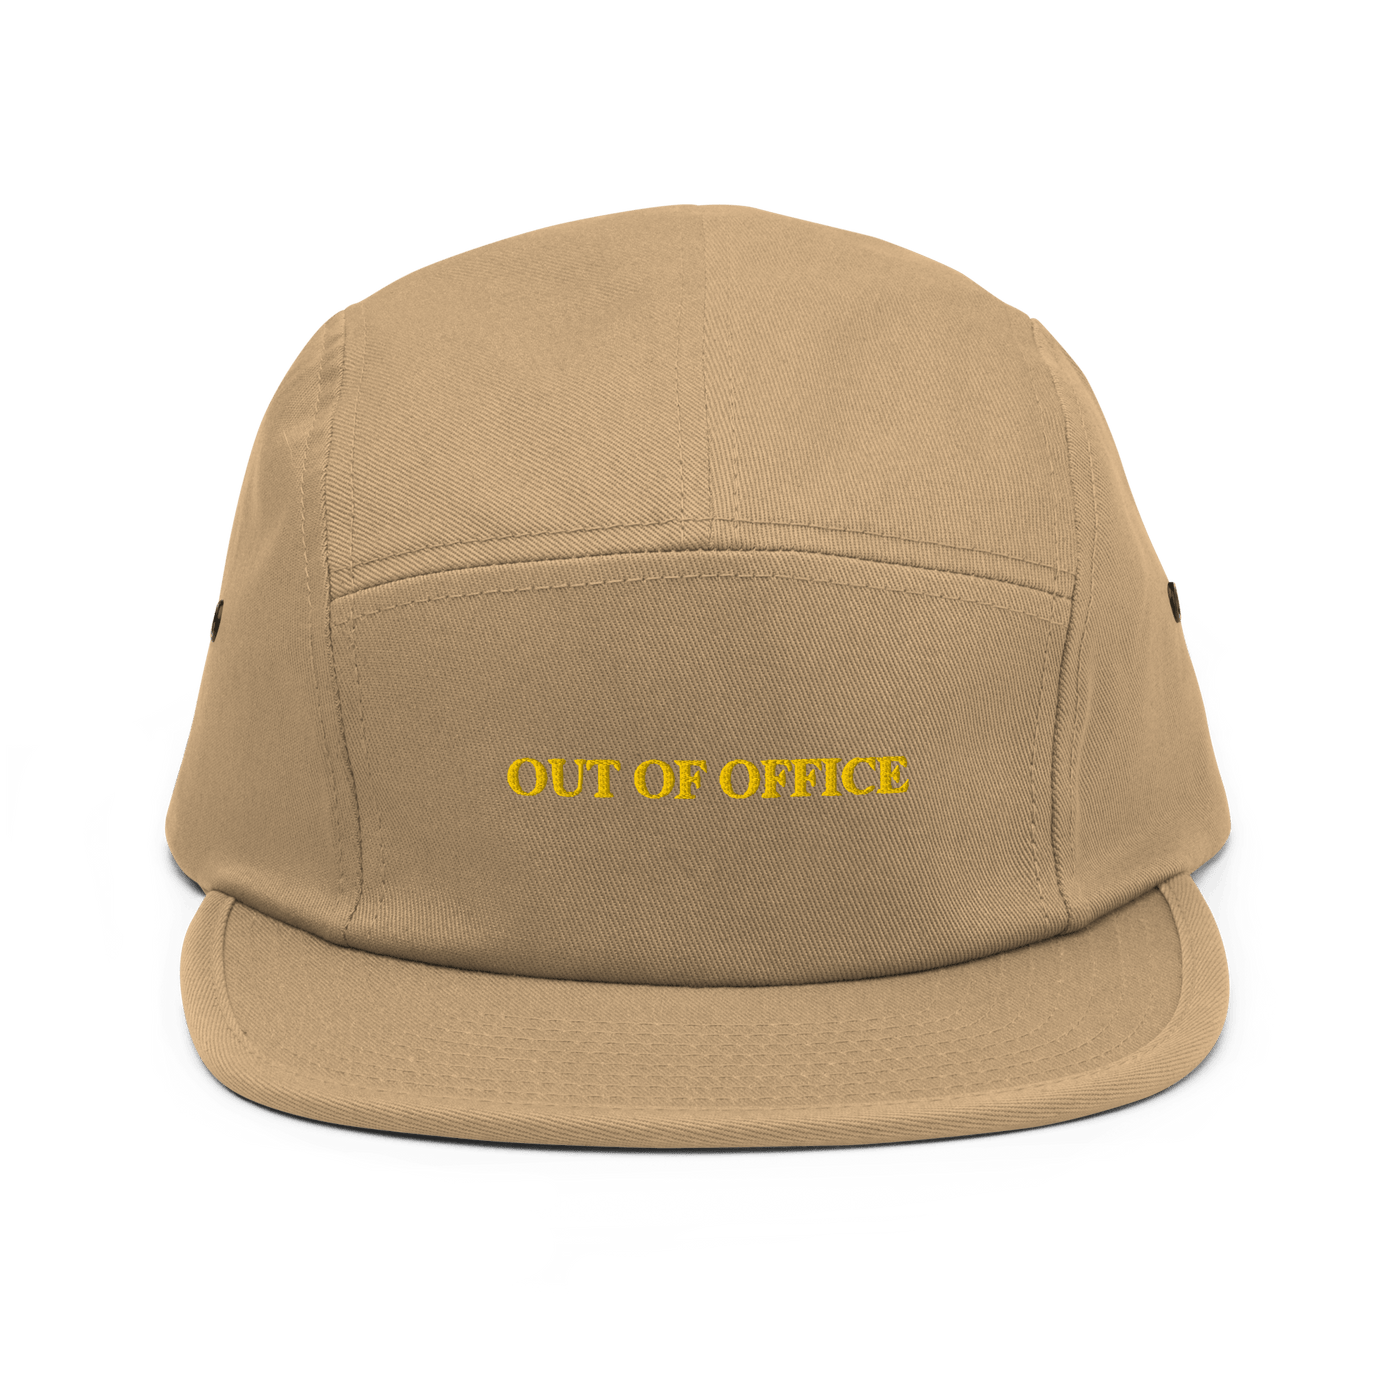 OUT OF OFFICE Five Panel Hat - Khaki - - Just Another Cap Store